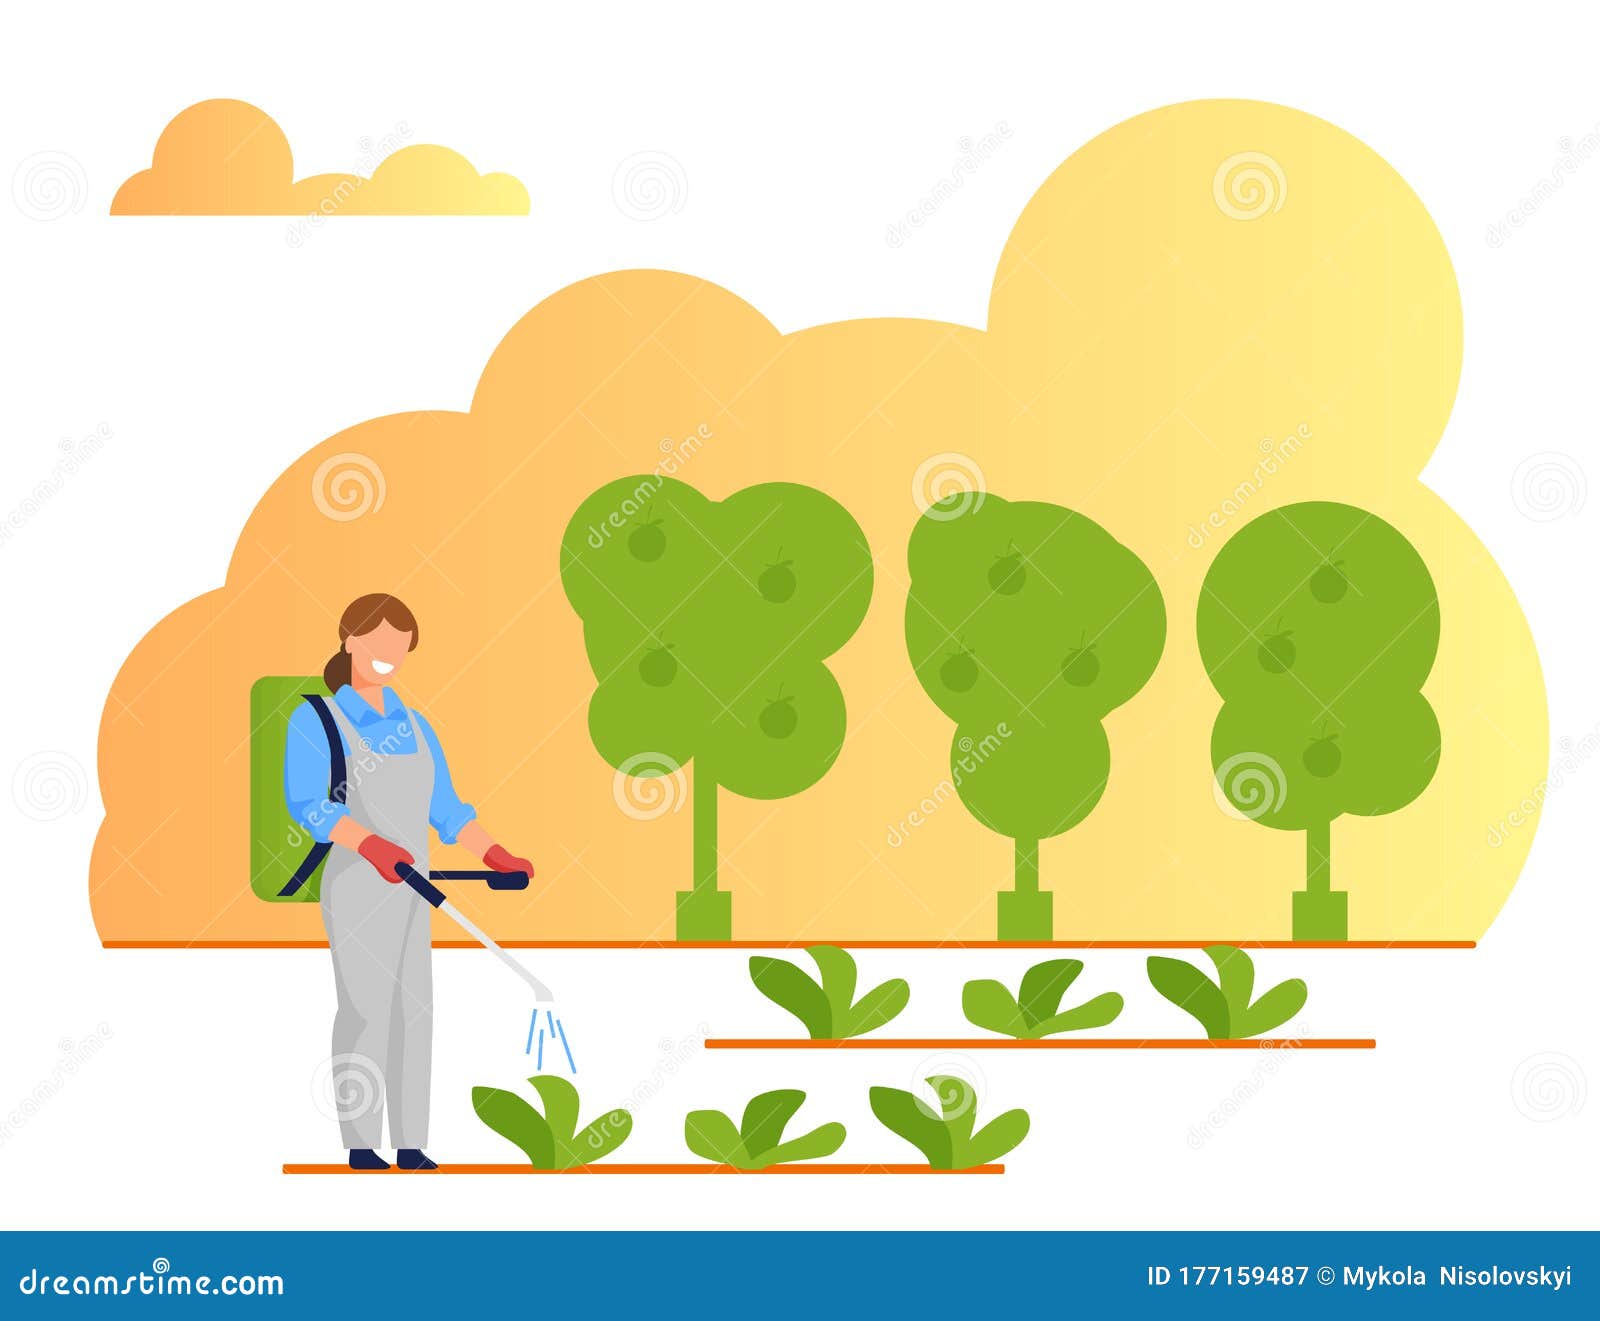 Woman Spraying Chemicals Fertilizers on Garden Bed Stock Vector ...